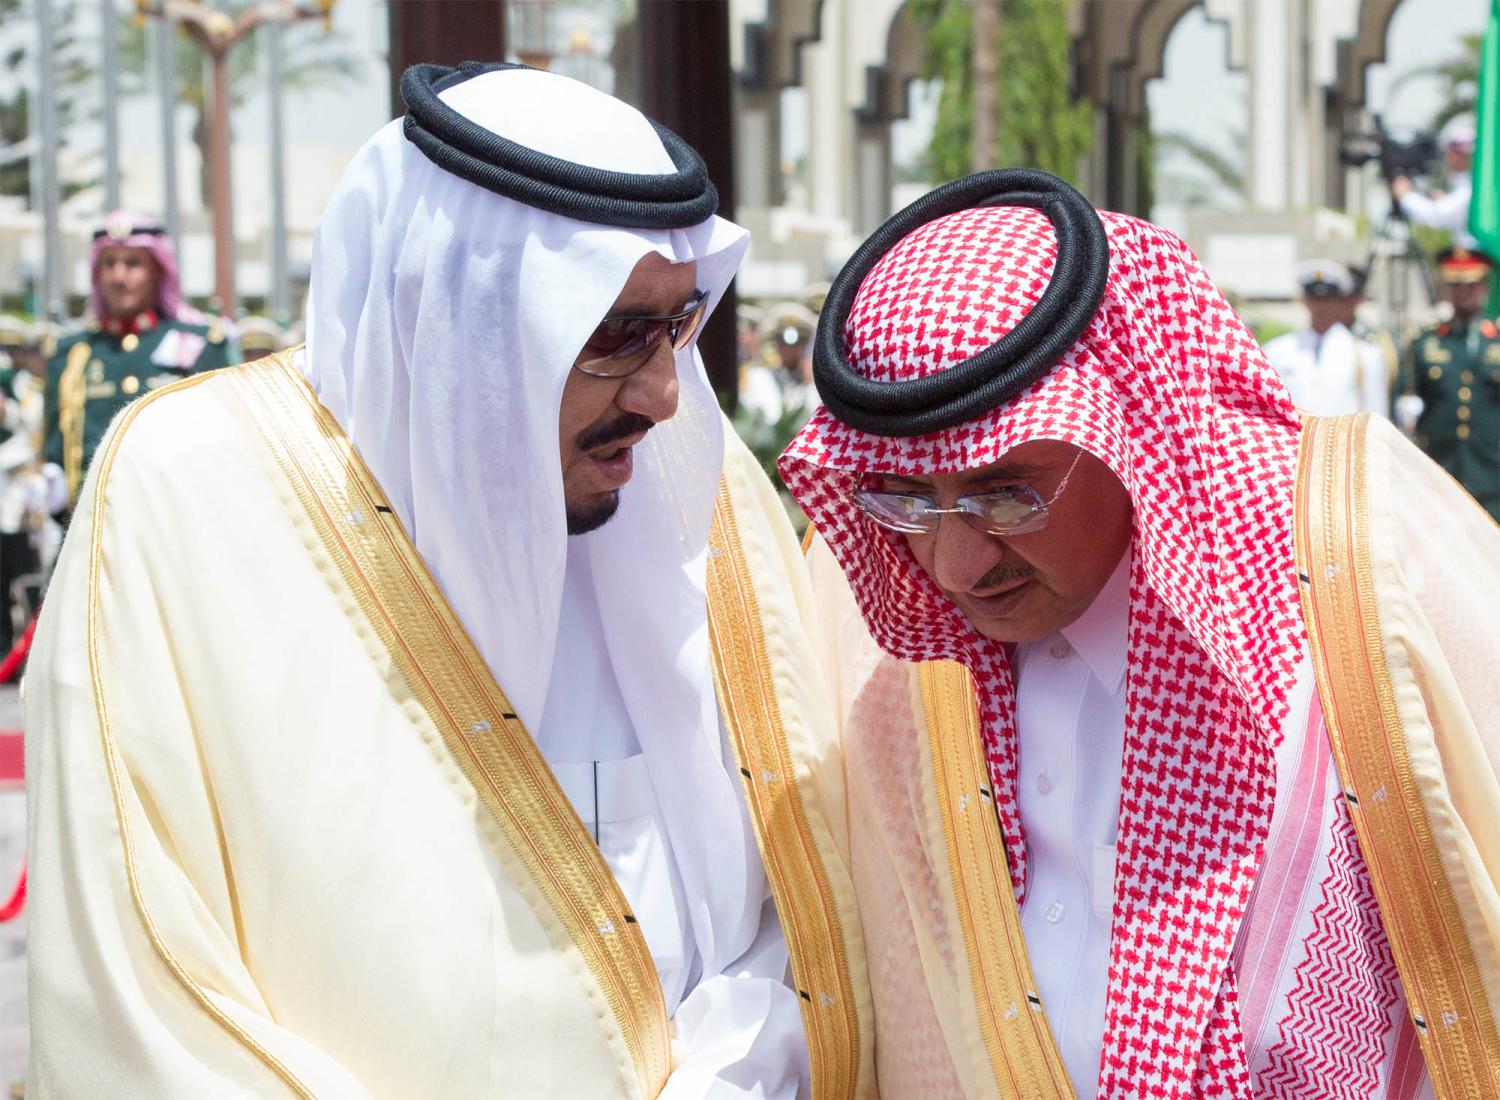 DATE IMPORTED:April 30, 2017Saudi Arabia's King Salman bin Abdulaziz Al Saud (L) speaks with Crown Prince Mohammed Bin Nayef during a reception ceremony in Jeddah, Saudi Arabia April 30, 2017. Bandar Algaloud/Courtesy of Saudi Royal Court/Handout via REUTERS ATTENTION EDITORS - THIS PICTURE WAS PROVIDED BY A THIRD PARTY. FOR EDITORIAL USE ONLY.